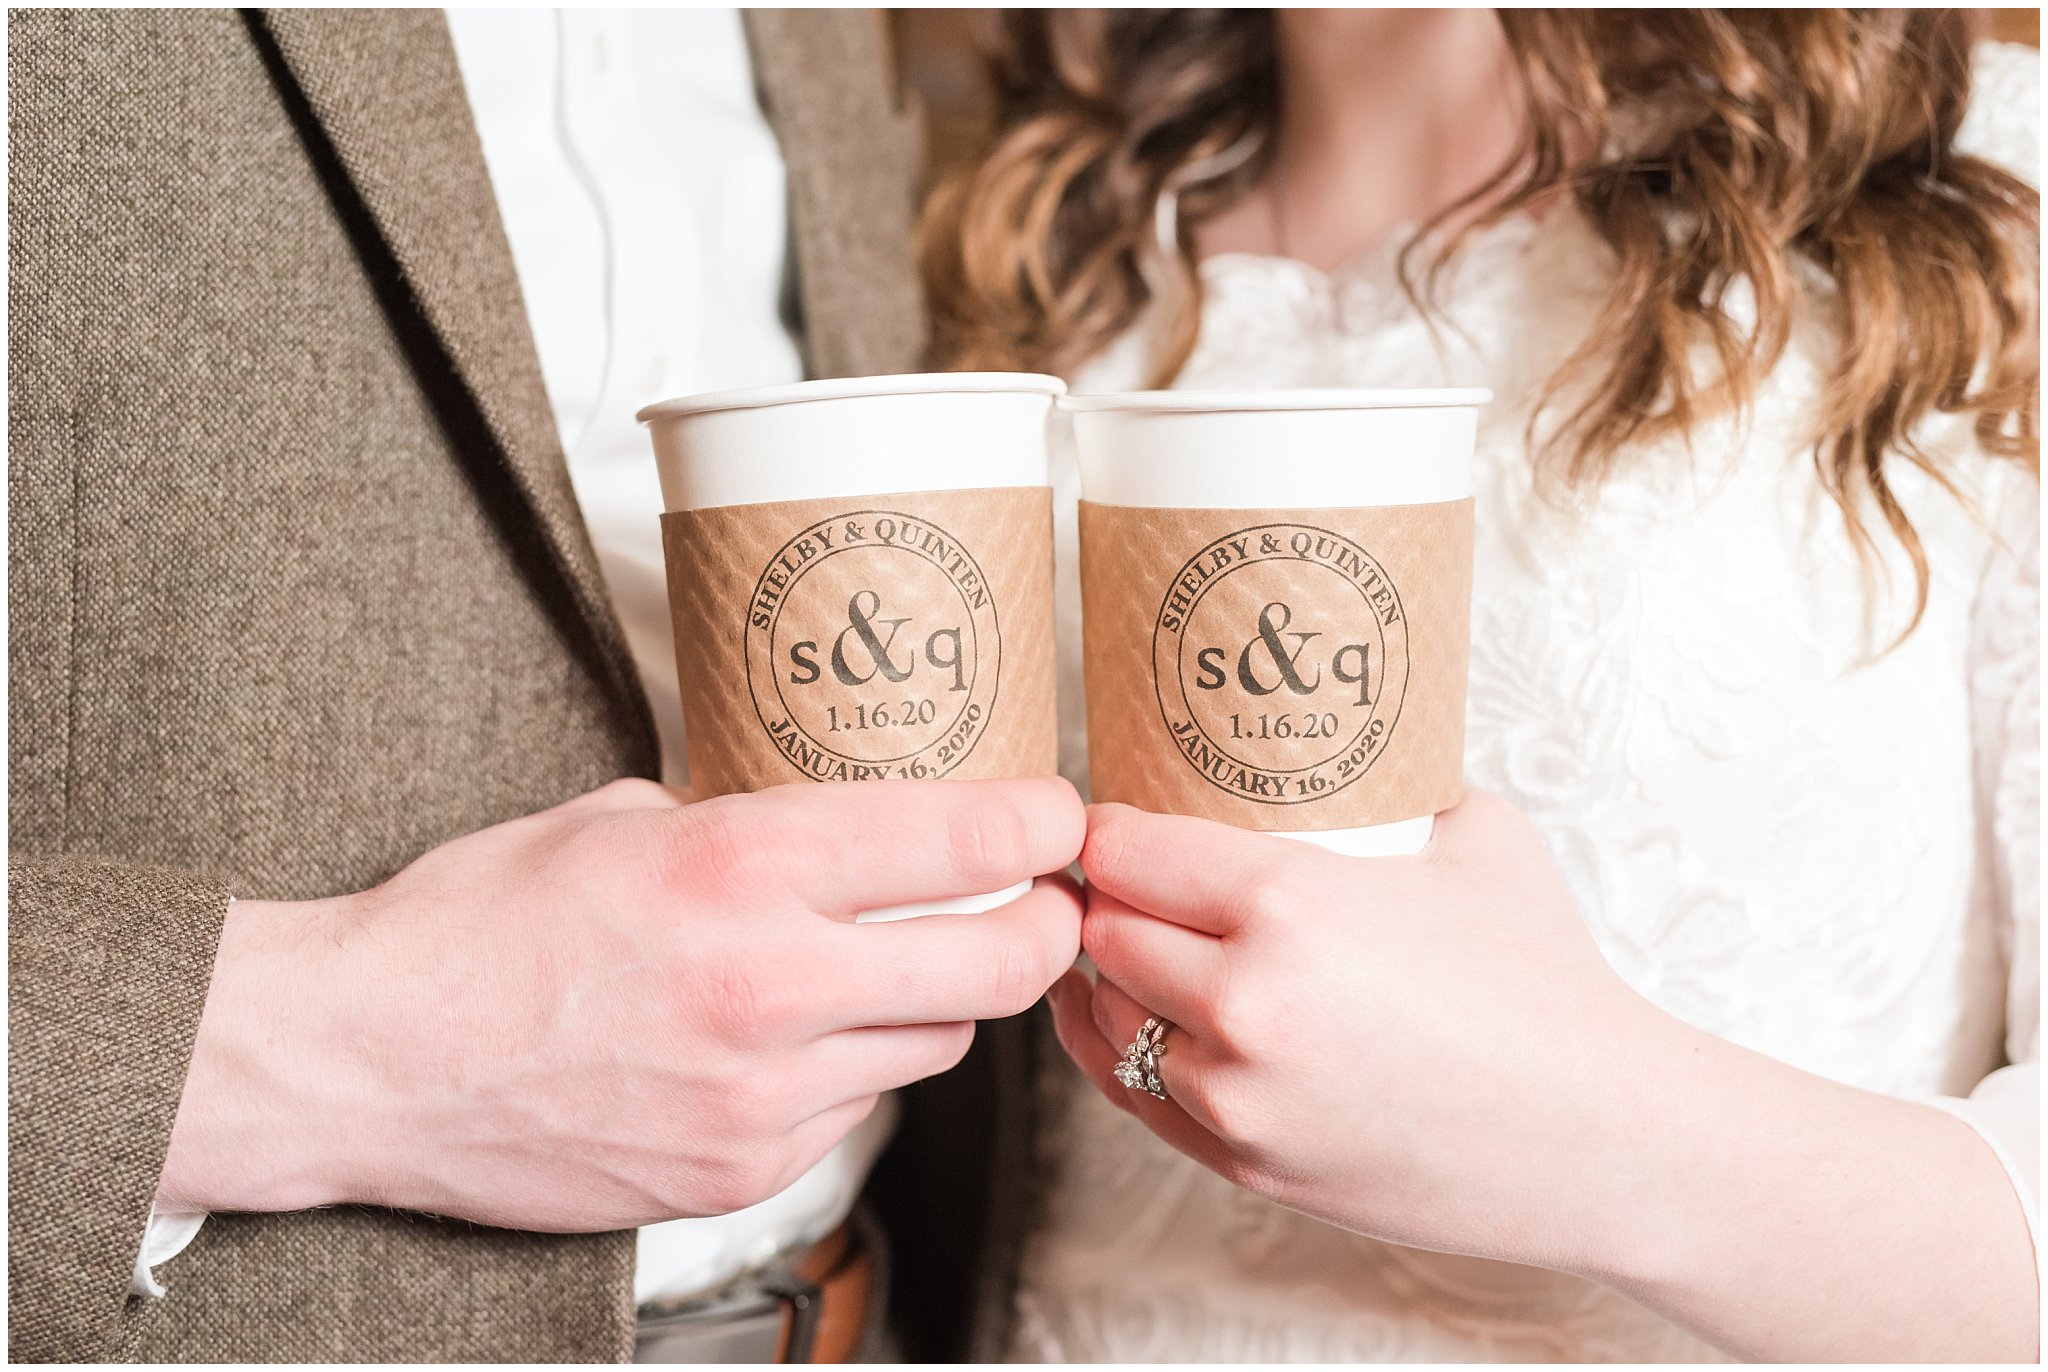 Bride and groom holding monogramed hot chocolate or coffee cups during reception at Sweet Magnolia Venues | Brown, Emerald Green, and white wedding | Ogden Temple and Sweet Magnolia Wedding | Jessie and Dallin Photography